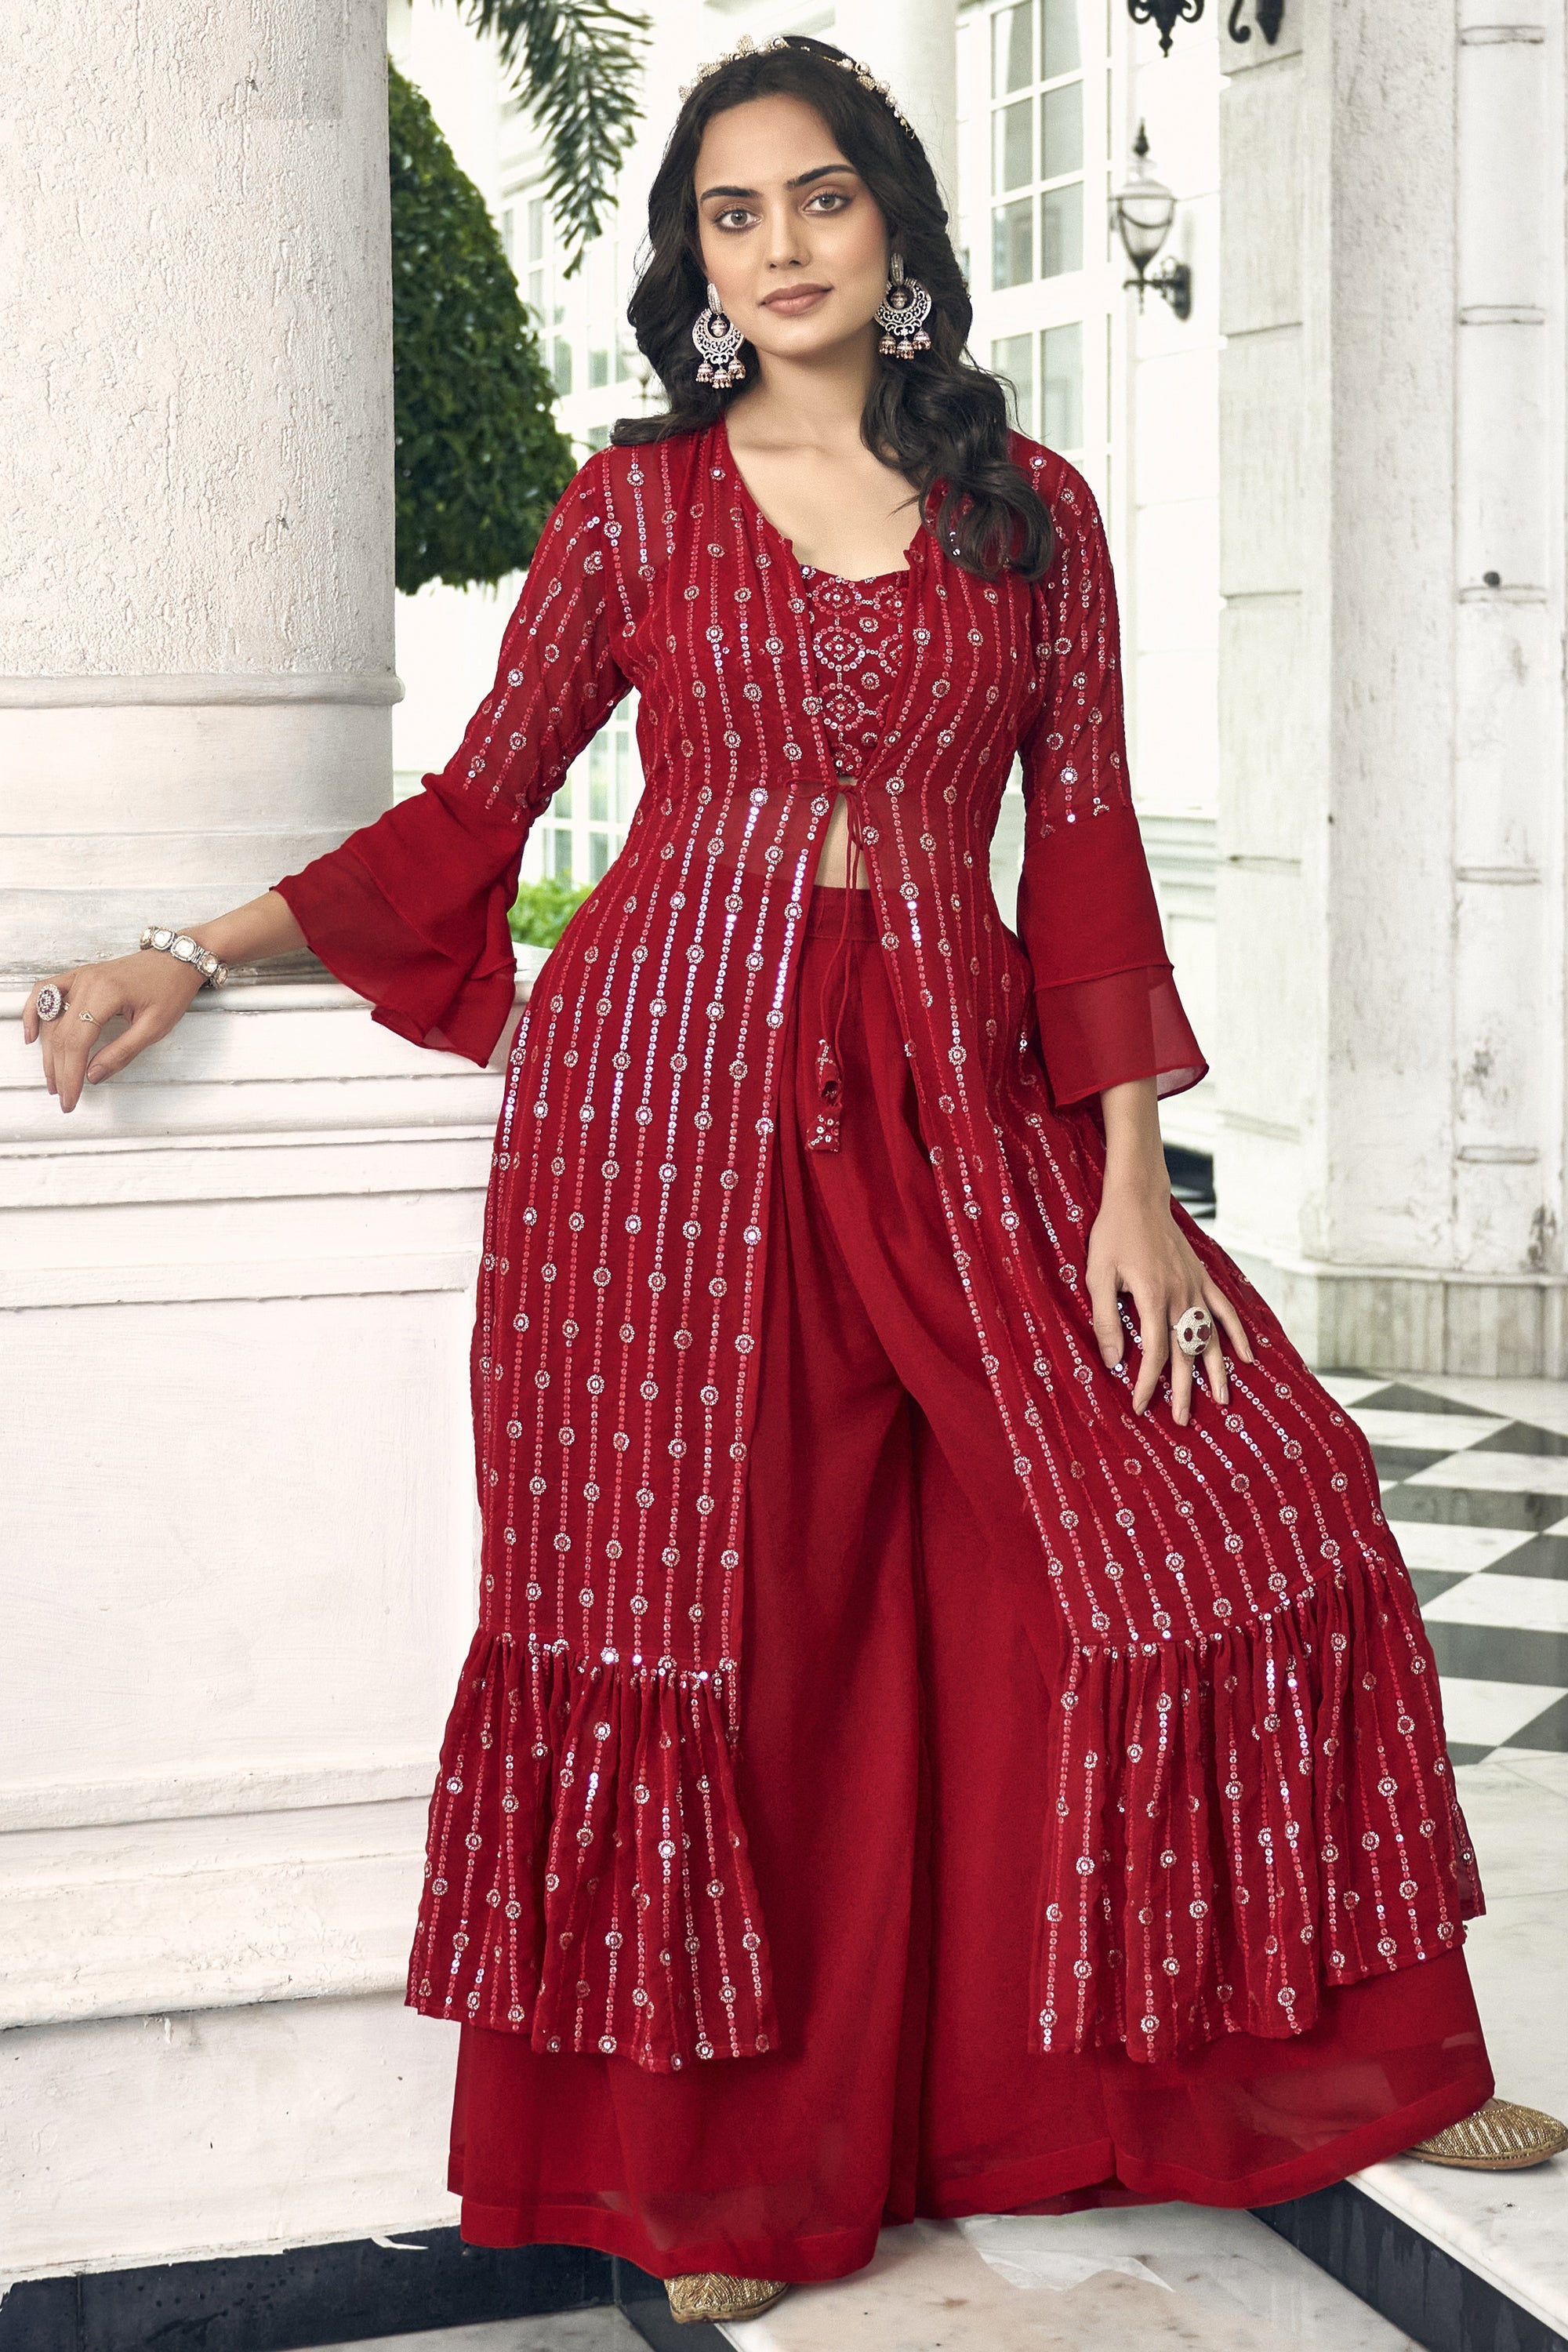 Peppy Wear Latest Red Sharara Suit for Baby | Ethnicroop